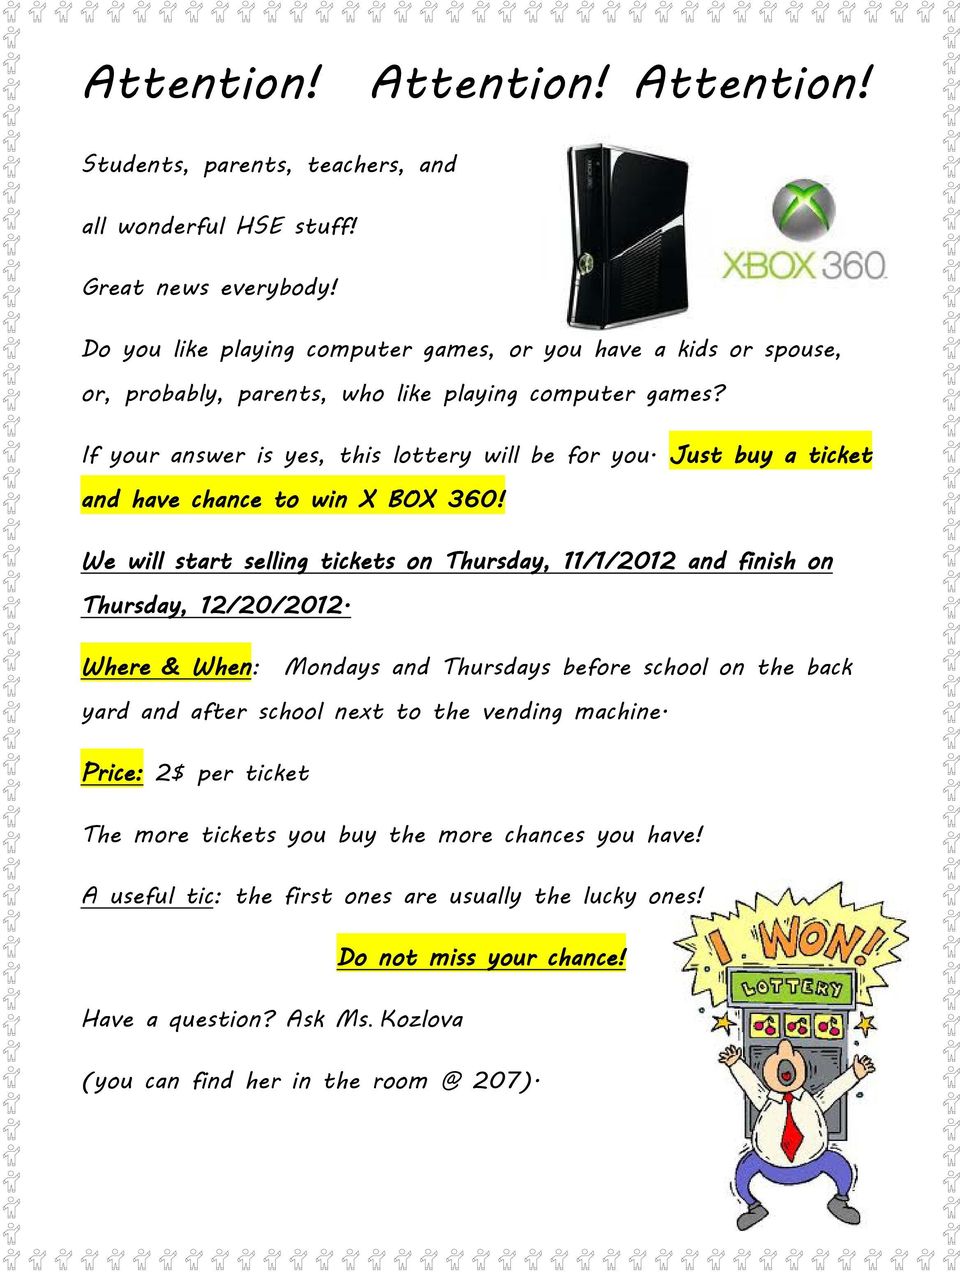 Just buy a ticket and have chance to win X BOX 360! We will start selling tickets on Thursday, 11/1/2012 and finish on Thursday, 12/20/2012.